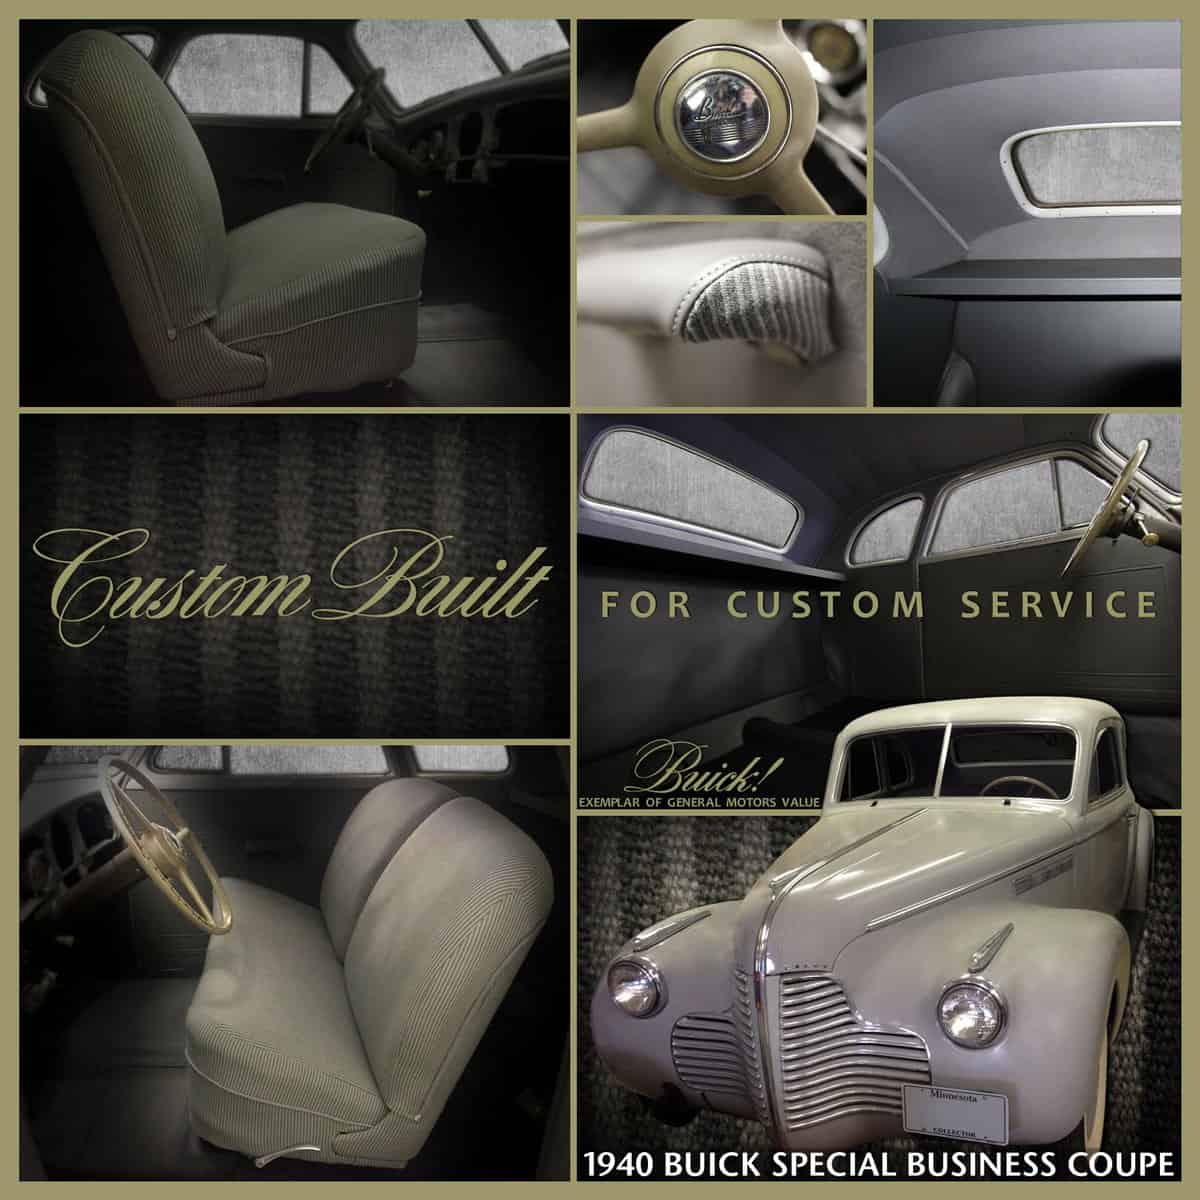 Automobile Upholstery Restoration - 1940 Buick Special Business Coupe